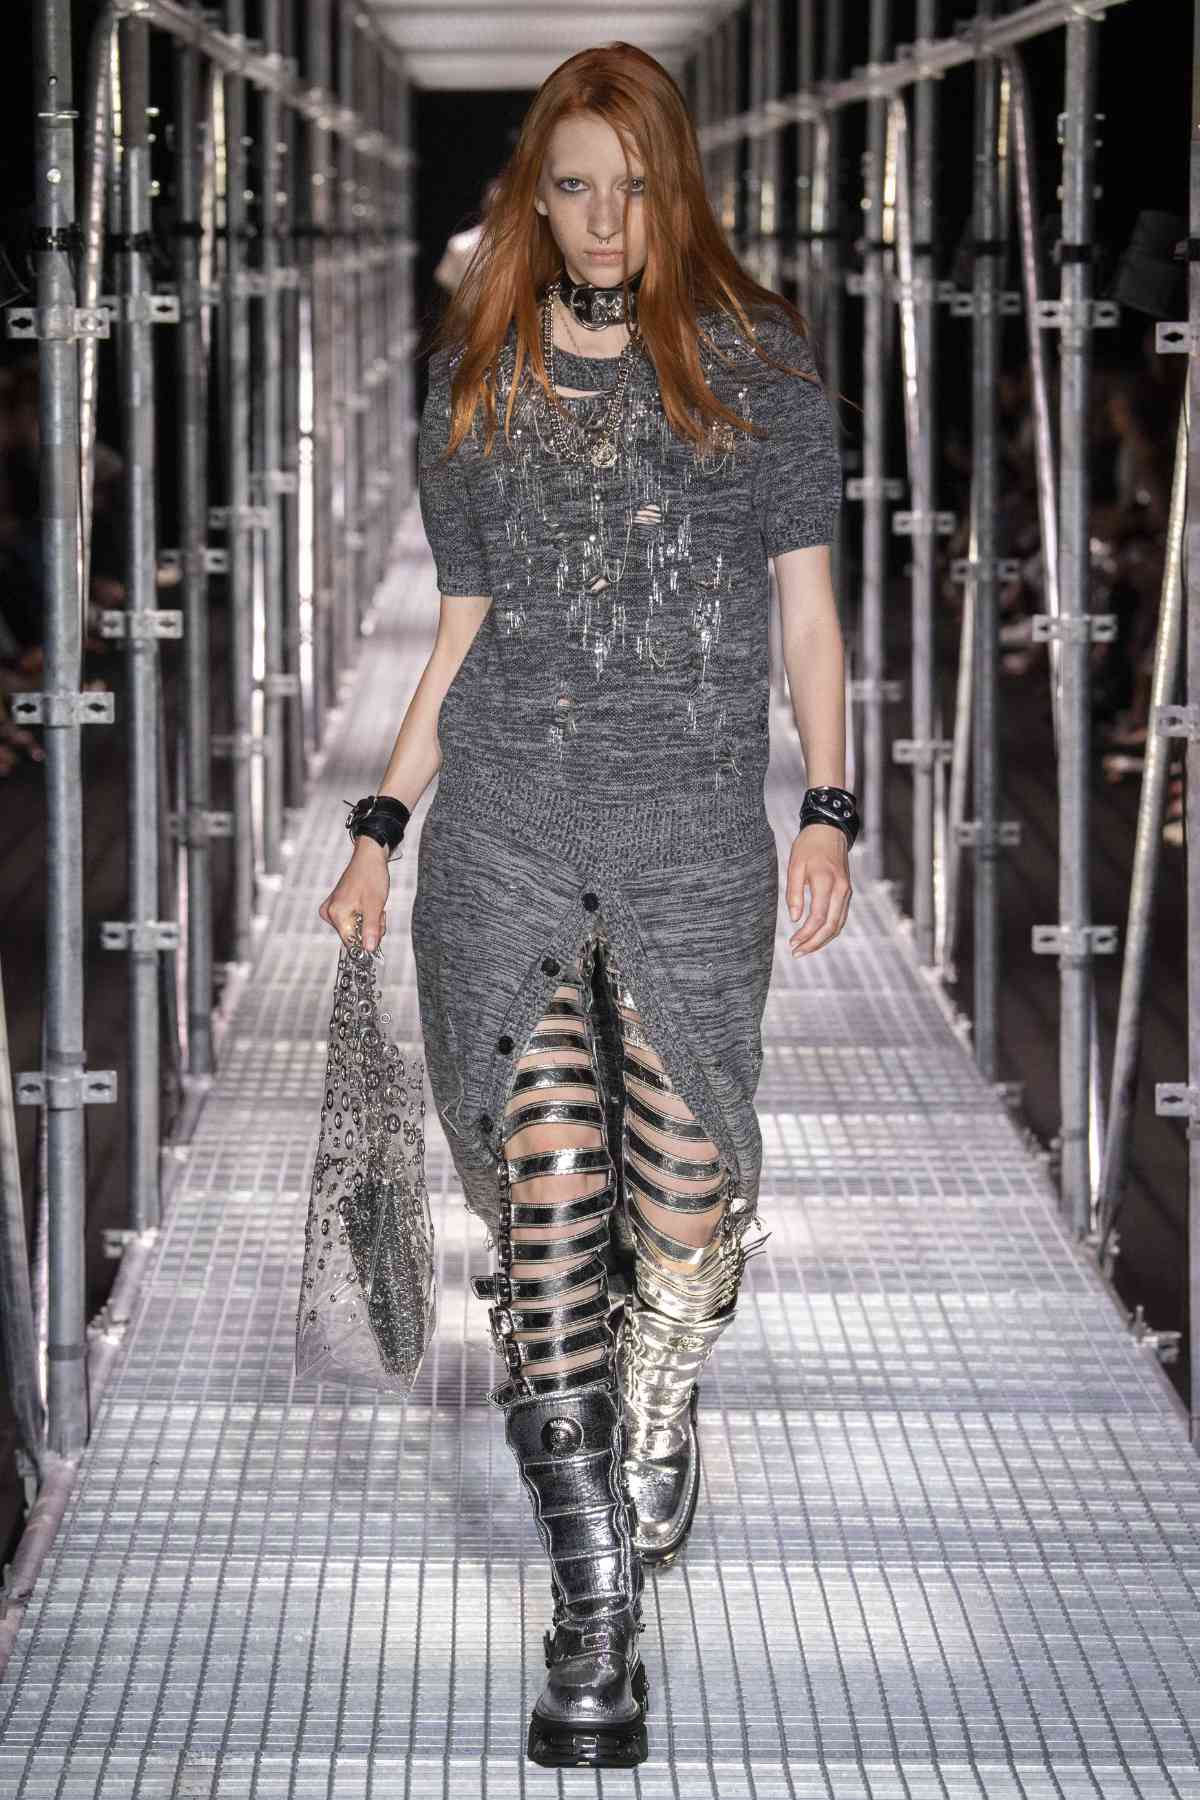 Paco Rabanne Presents Its New Spring Summer 2023 Collection: On A Mission